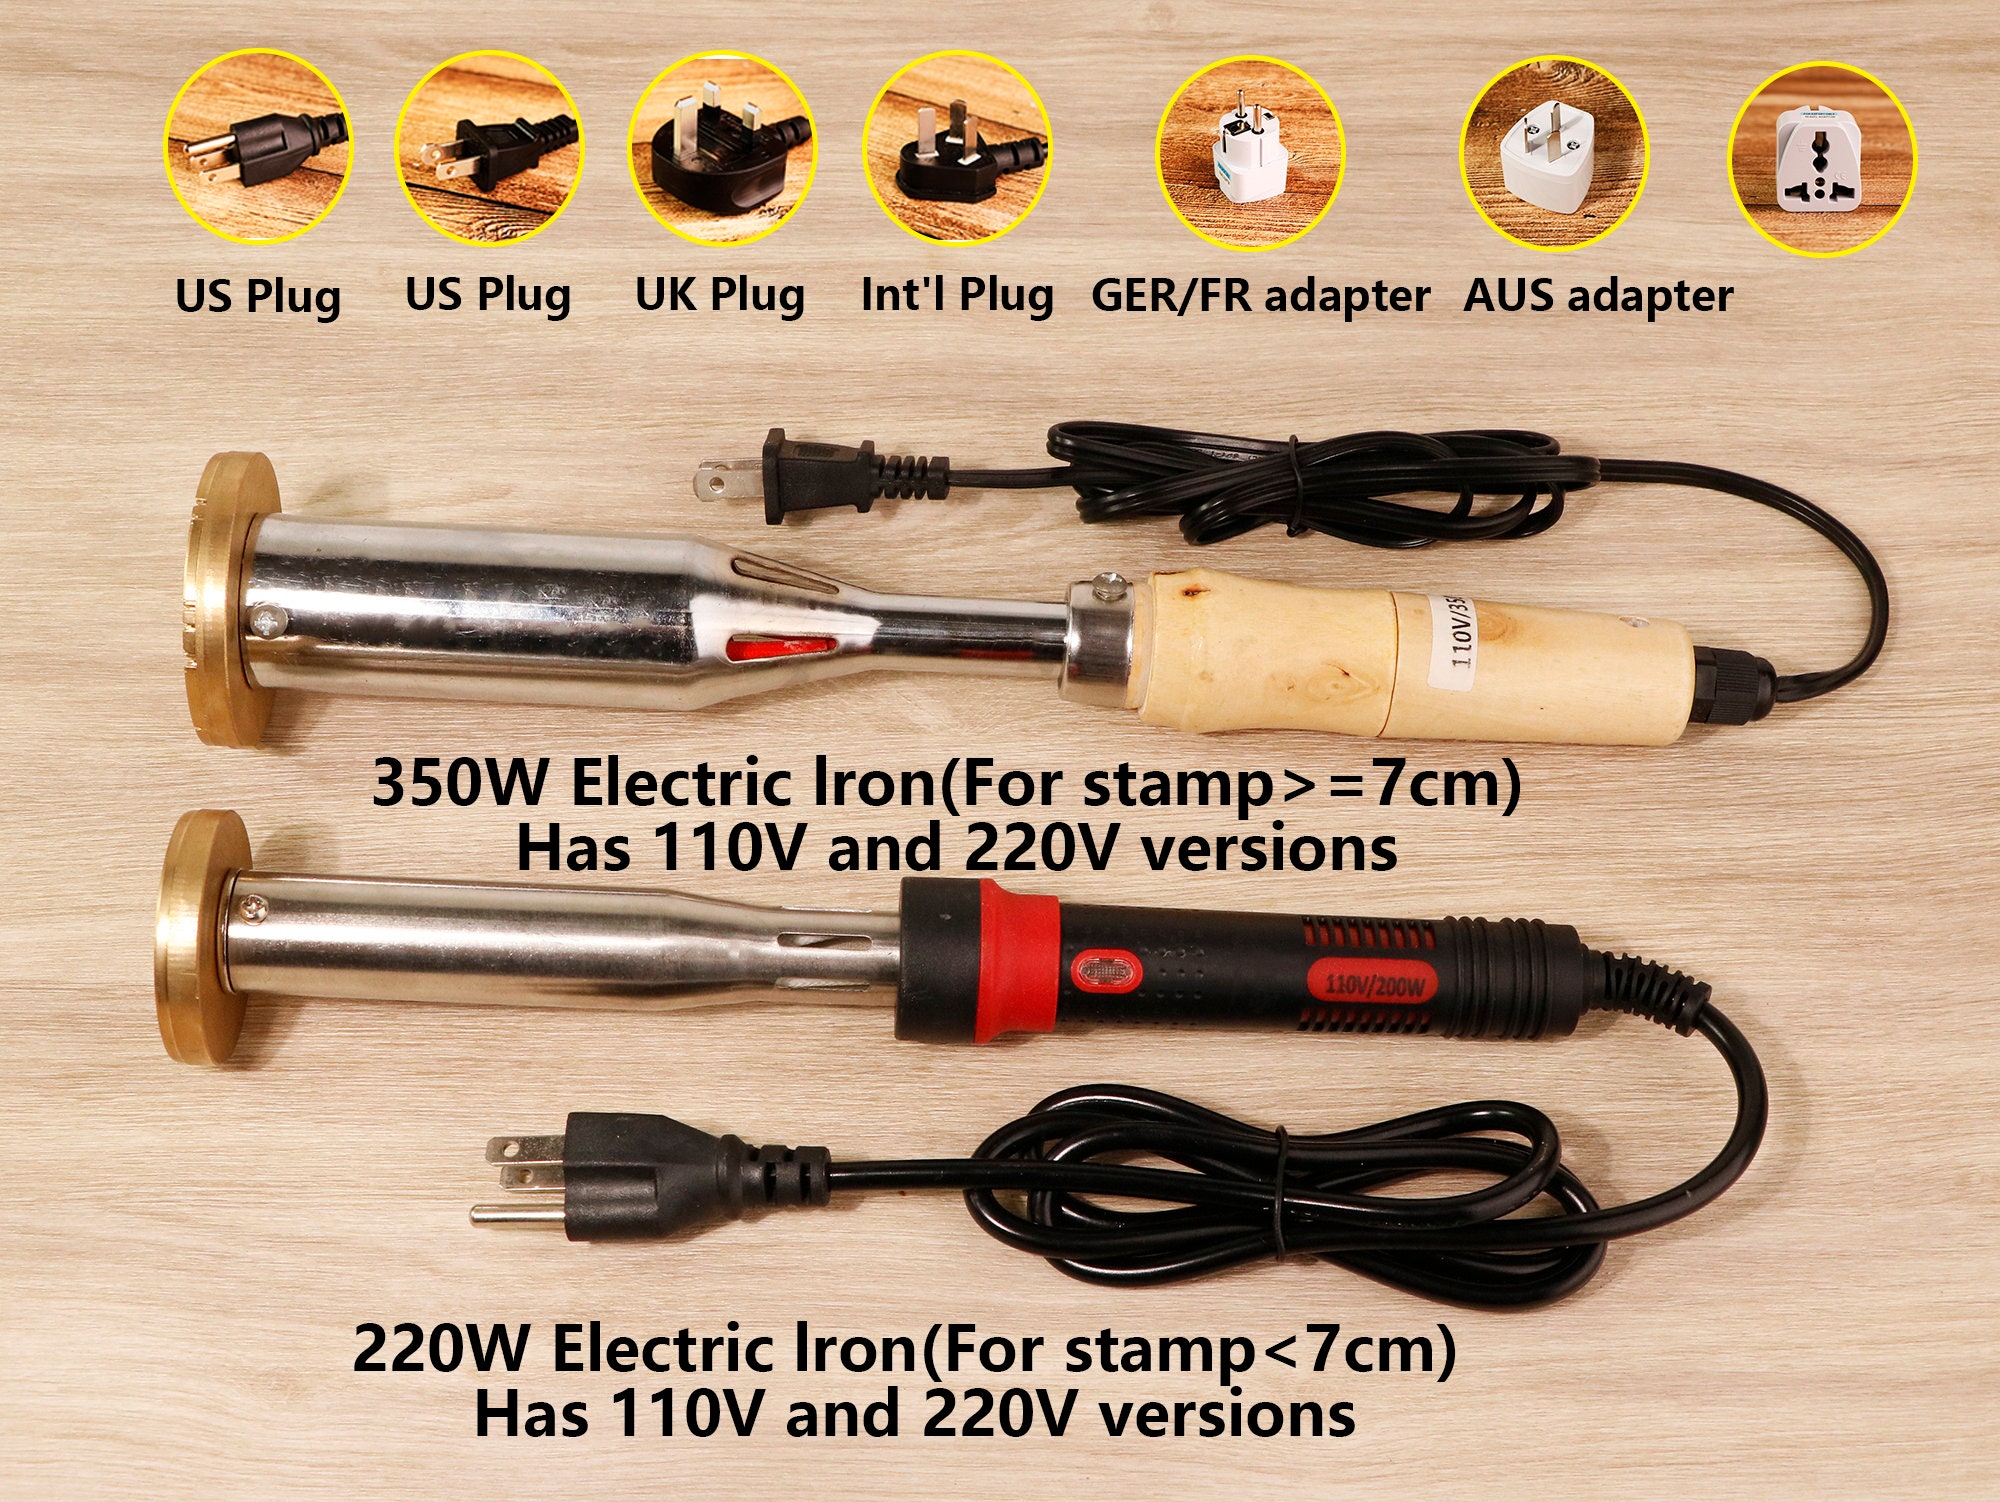 SNKOURIN Wood Burning Kit, Electric Branding Iron for Wood, 350W Handheld  Wood Stamping Tool for Woodworker and Leather Crafts, Food Branding Iron